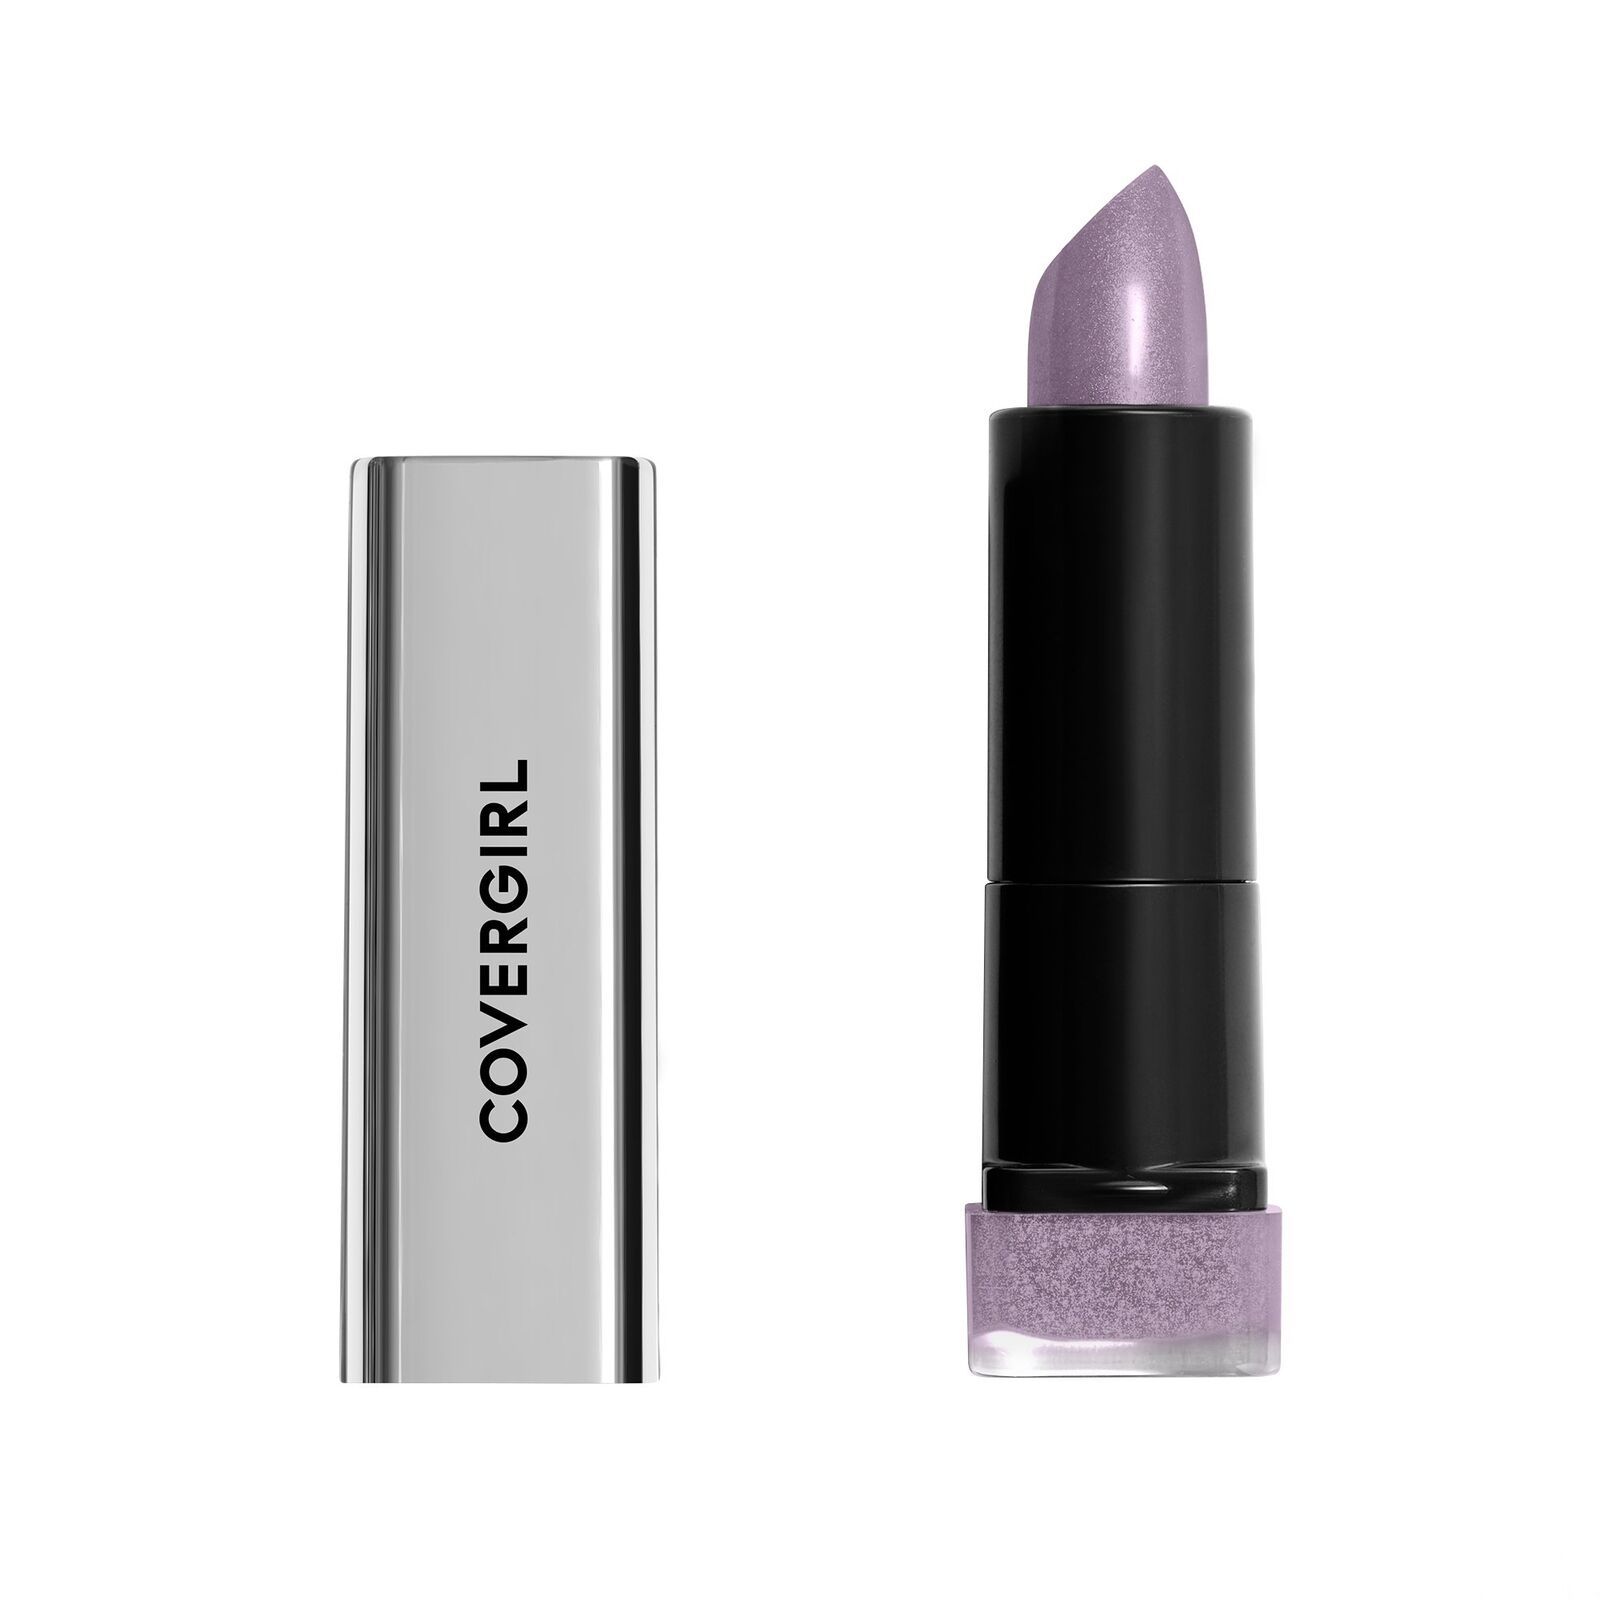 Primary image for COVERGIRL Exhibitionist Lipstick Metallic, Stop The Press 540, 0.123 Ounce